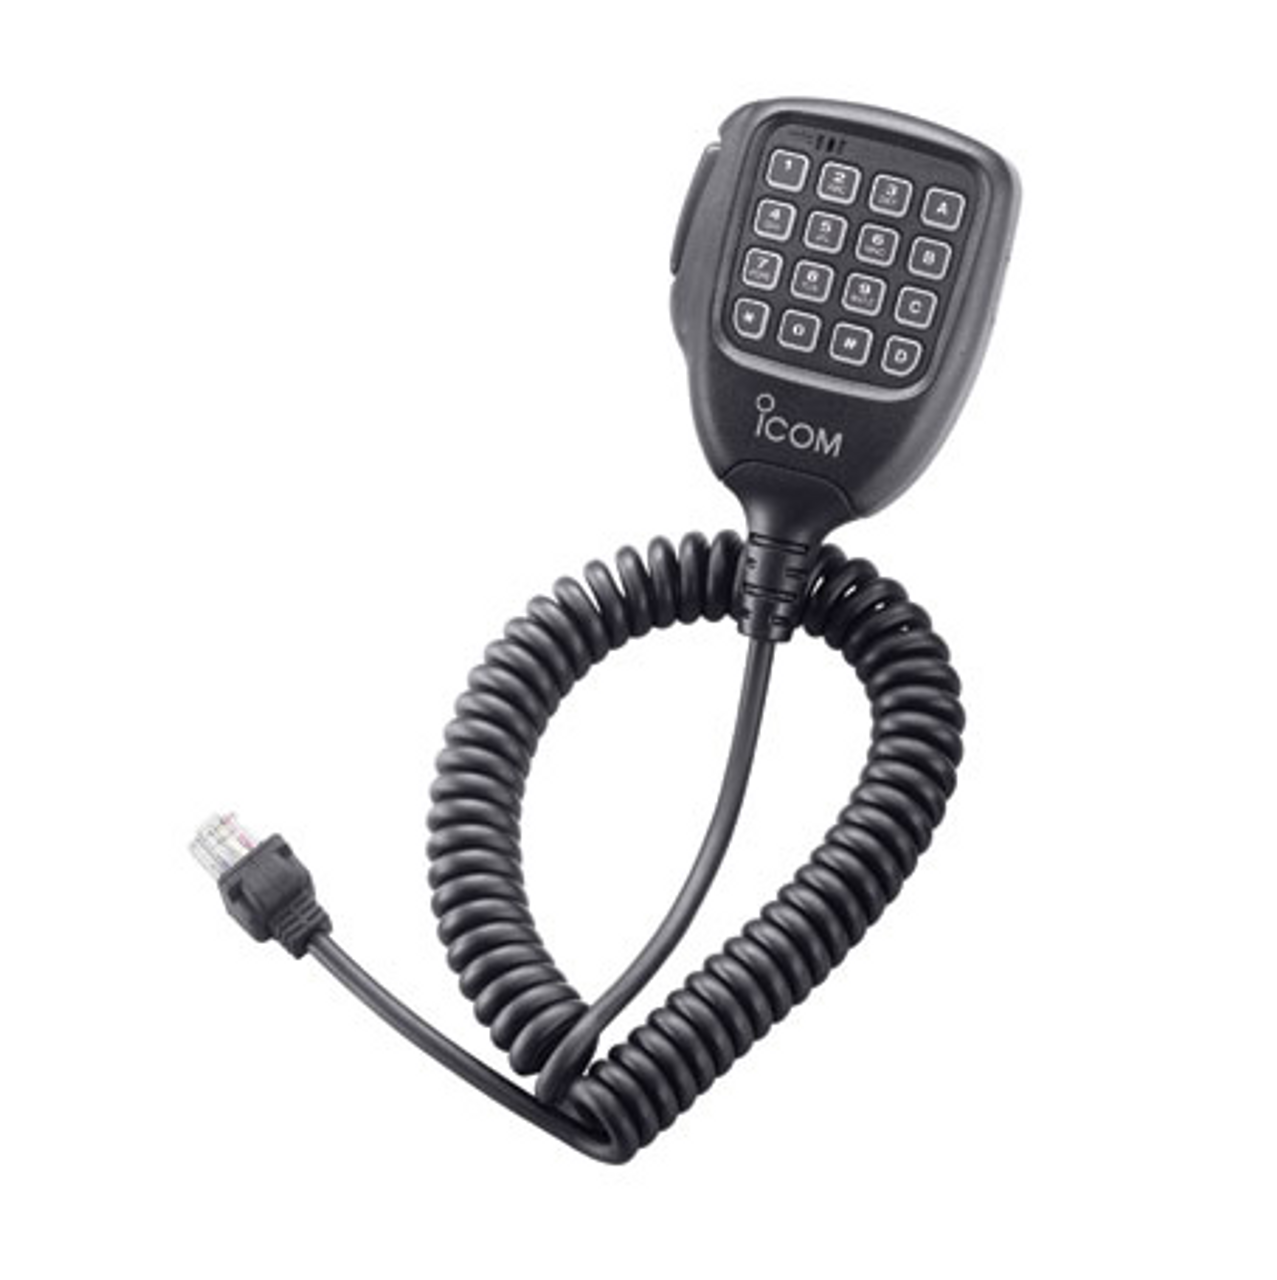 ICOM HM-152T DTMF Microphone for ICOM Mobile Two Way Radios